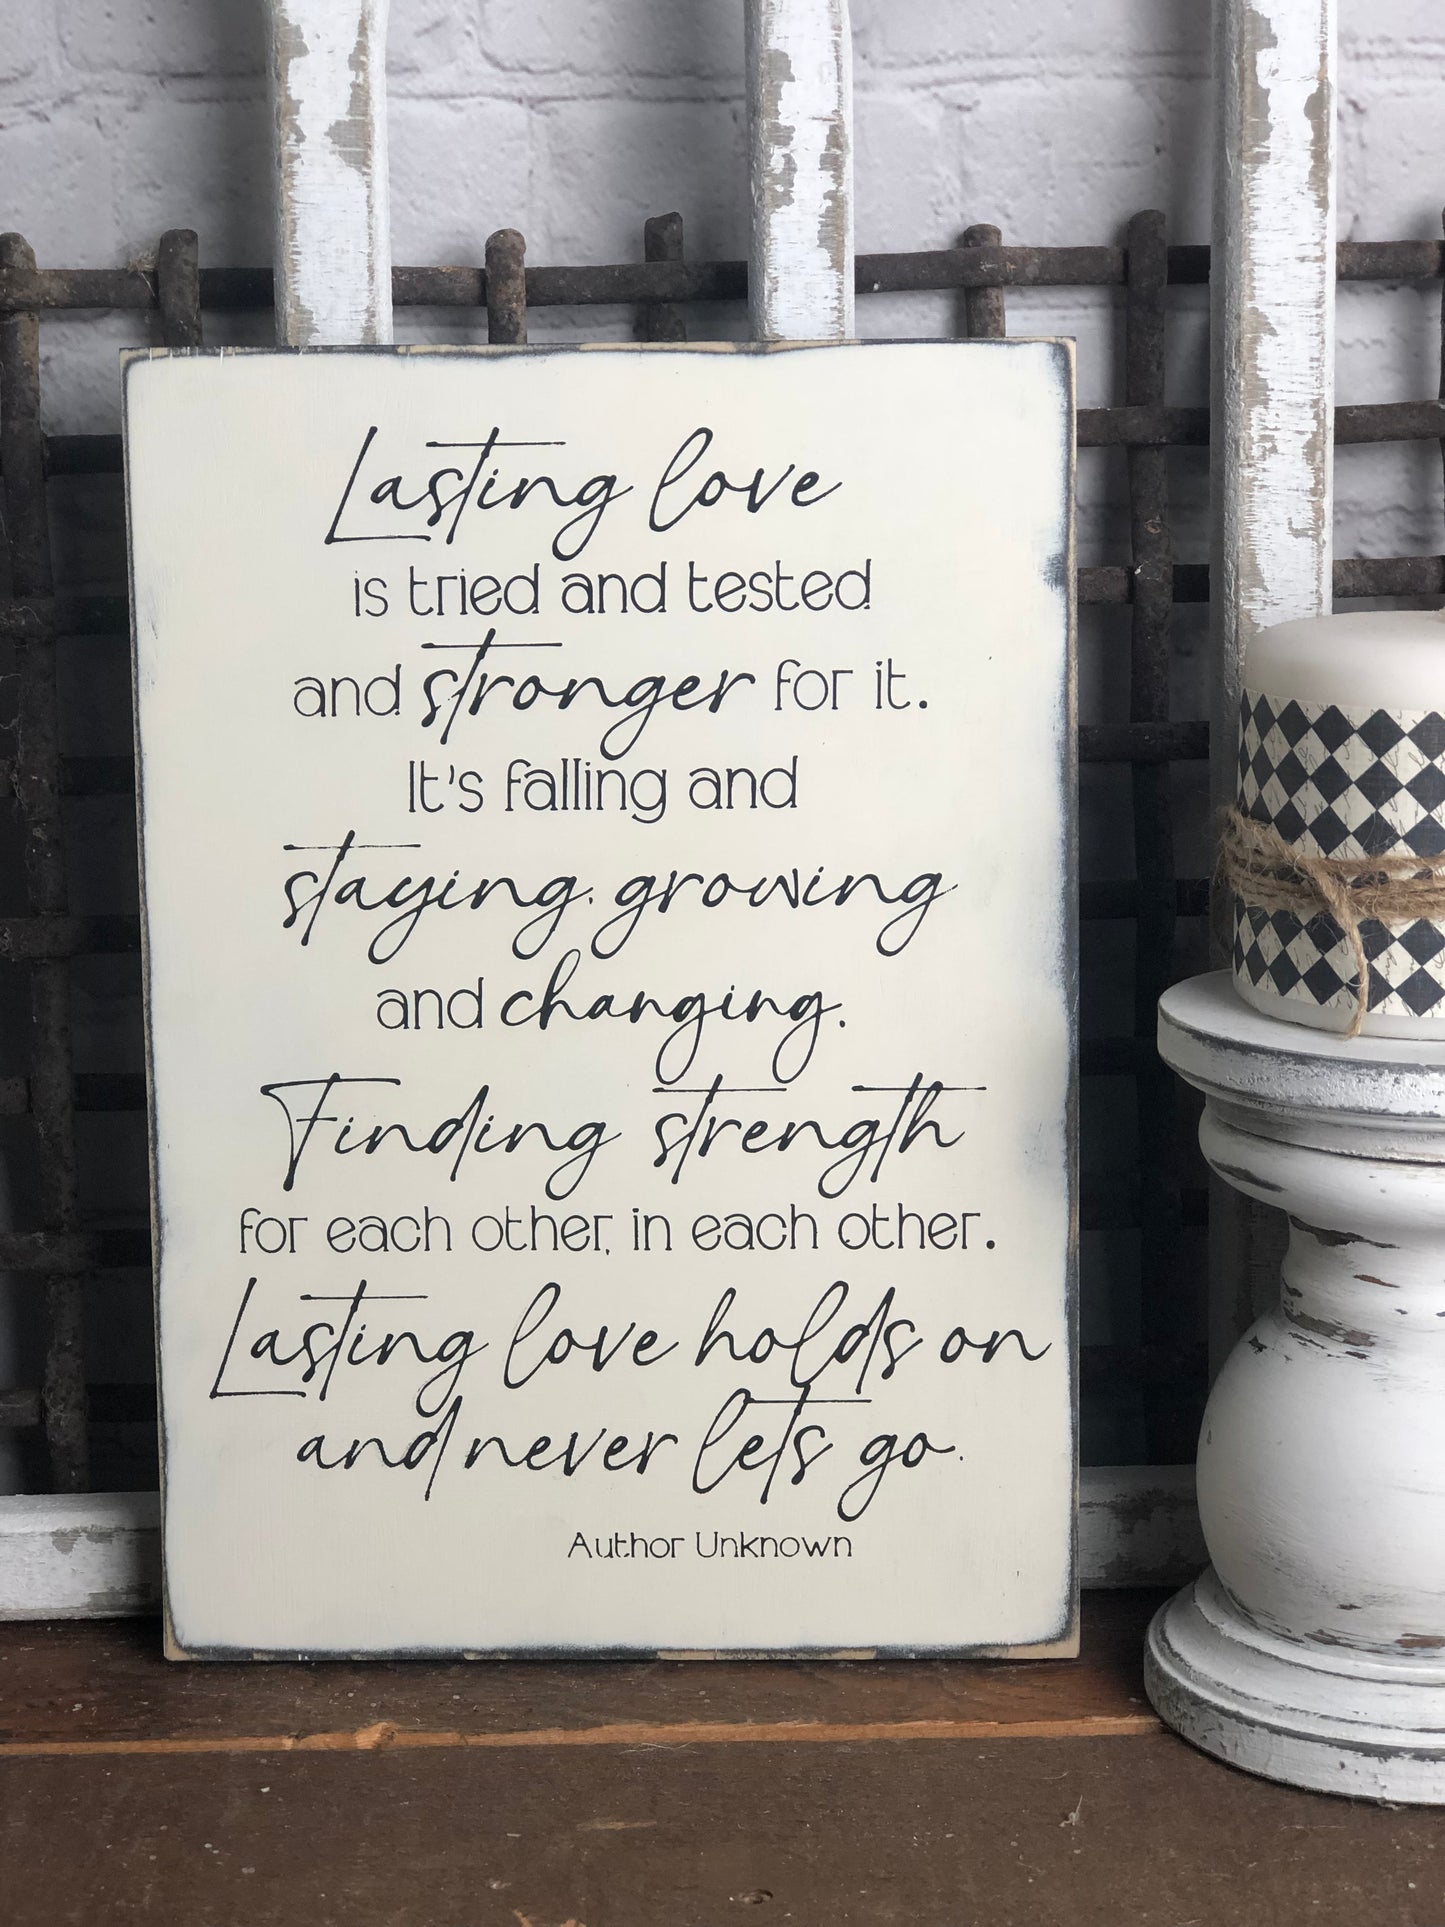 LASTING LOVE IS TRIED AND TESTED - WOOD SIGN